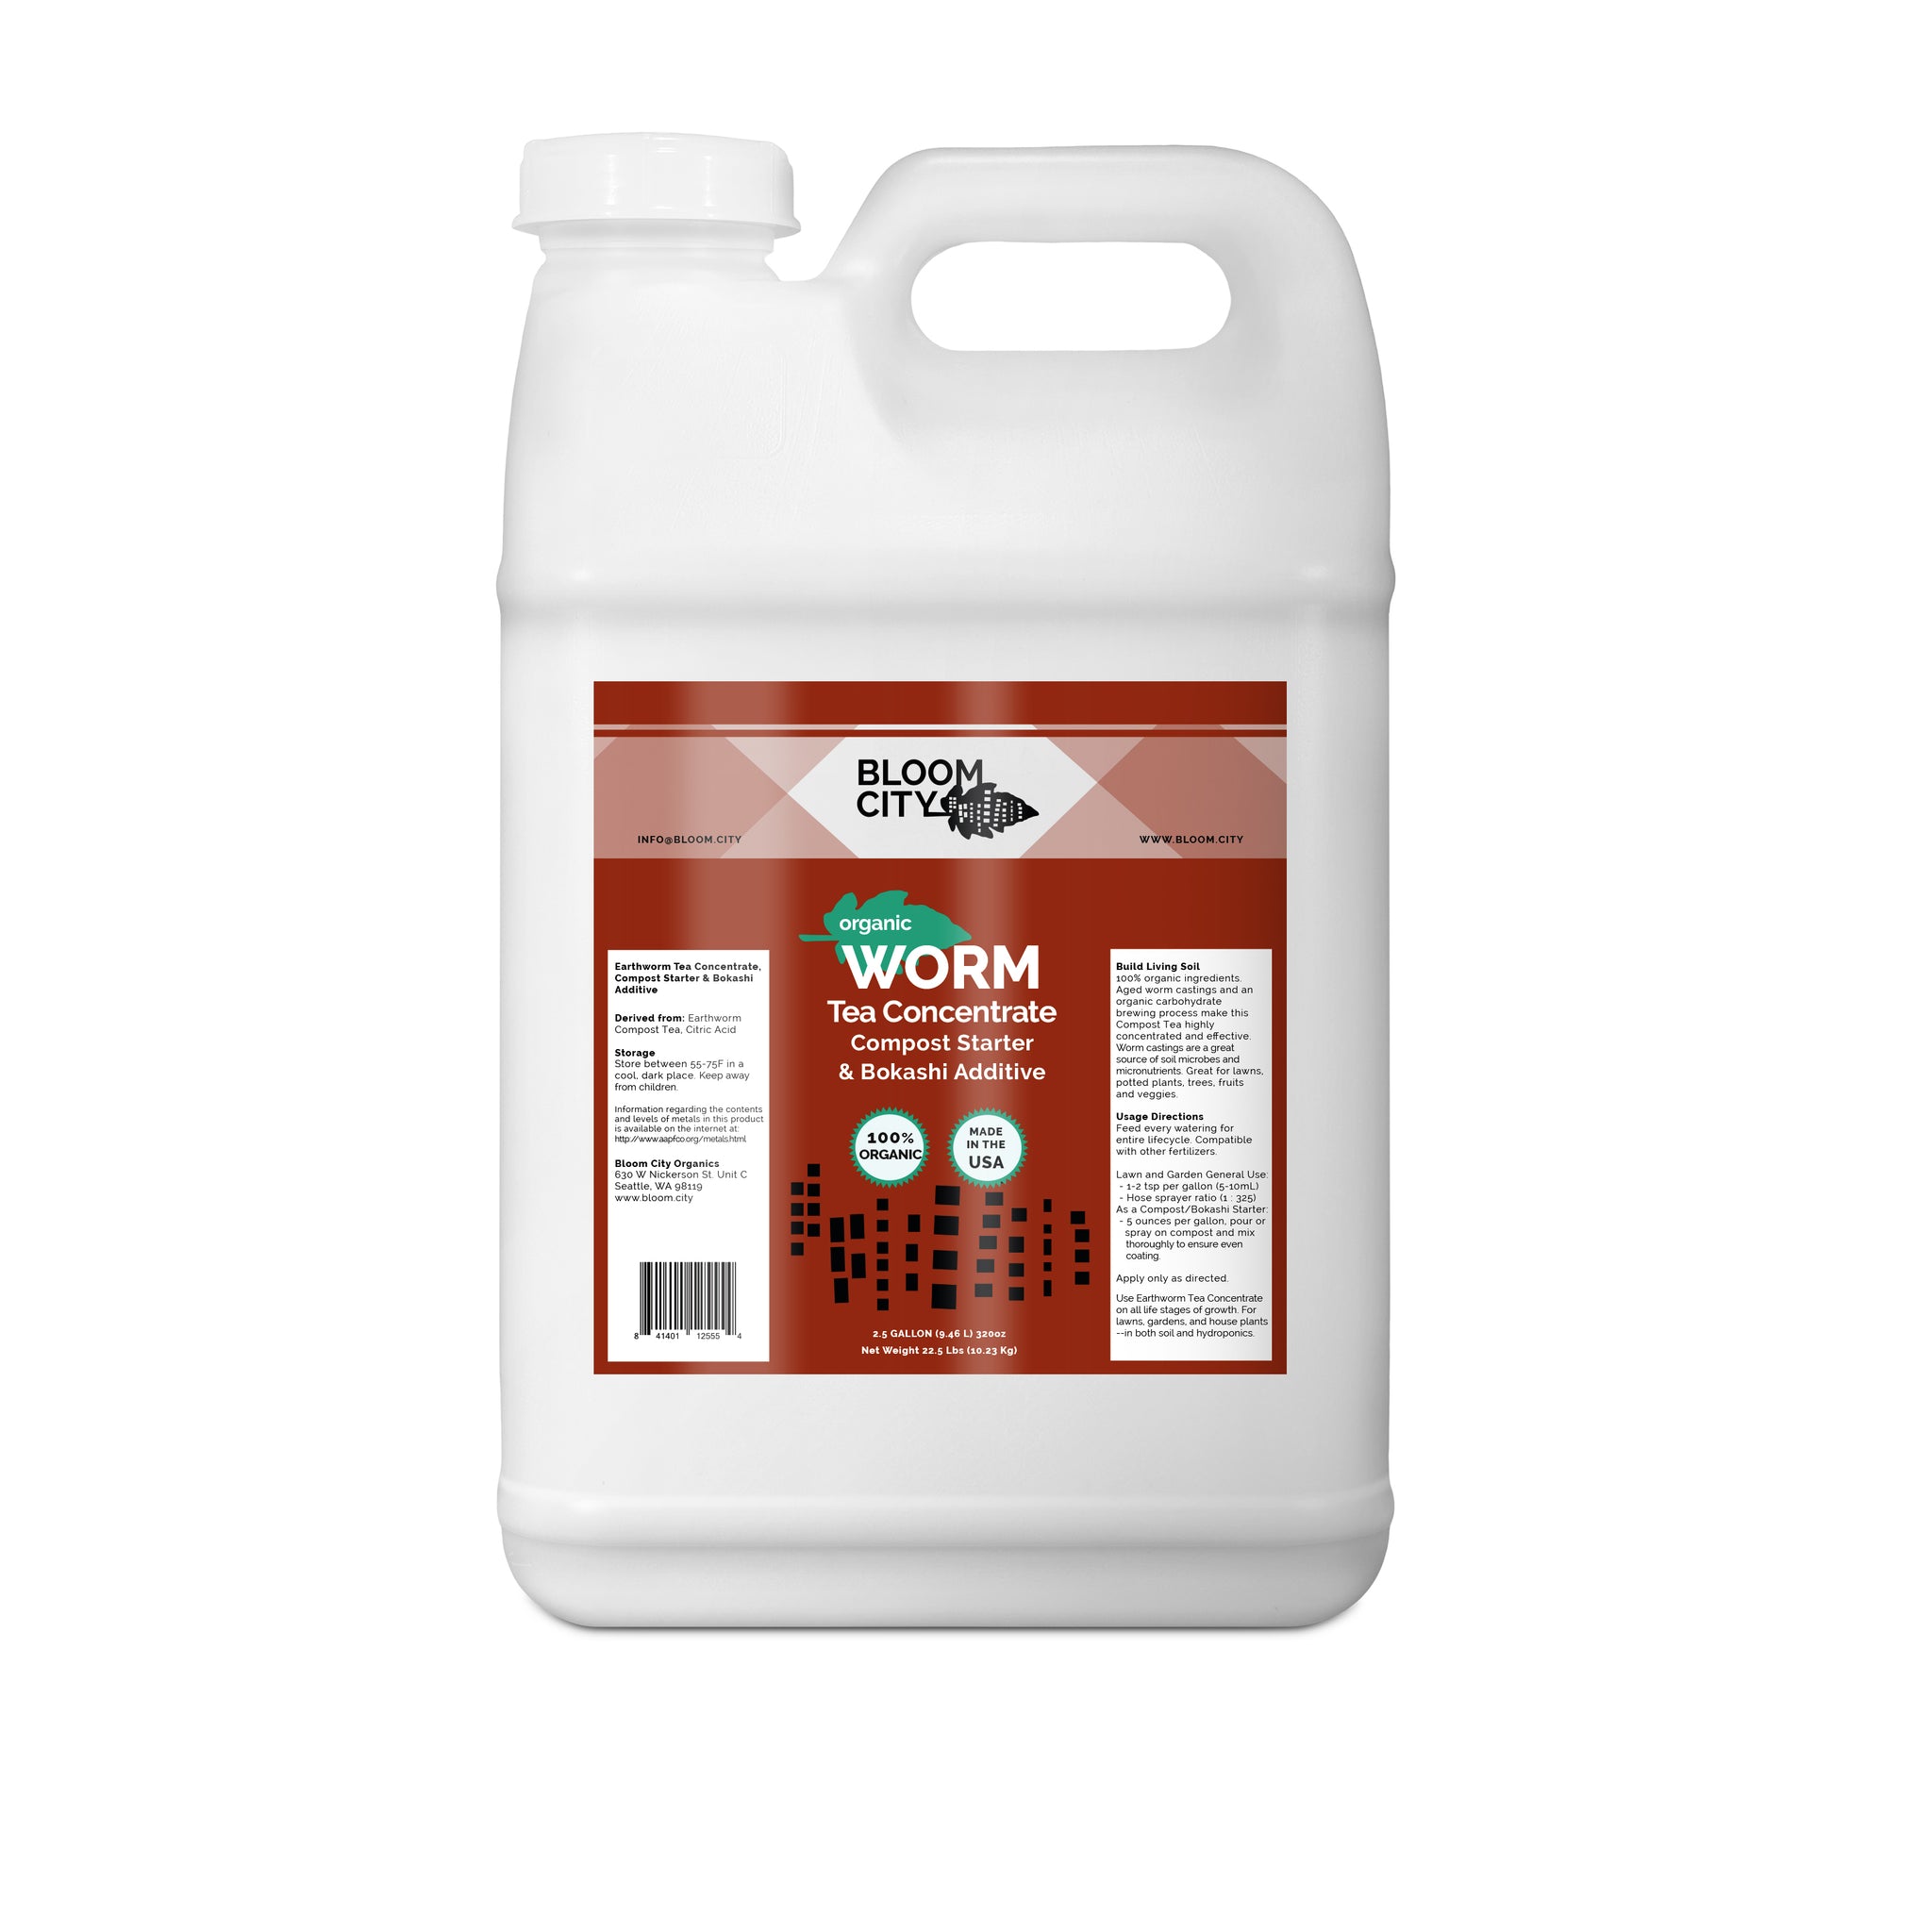 Worm Tea Concentrate  Organic - Bloom City